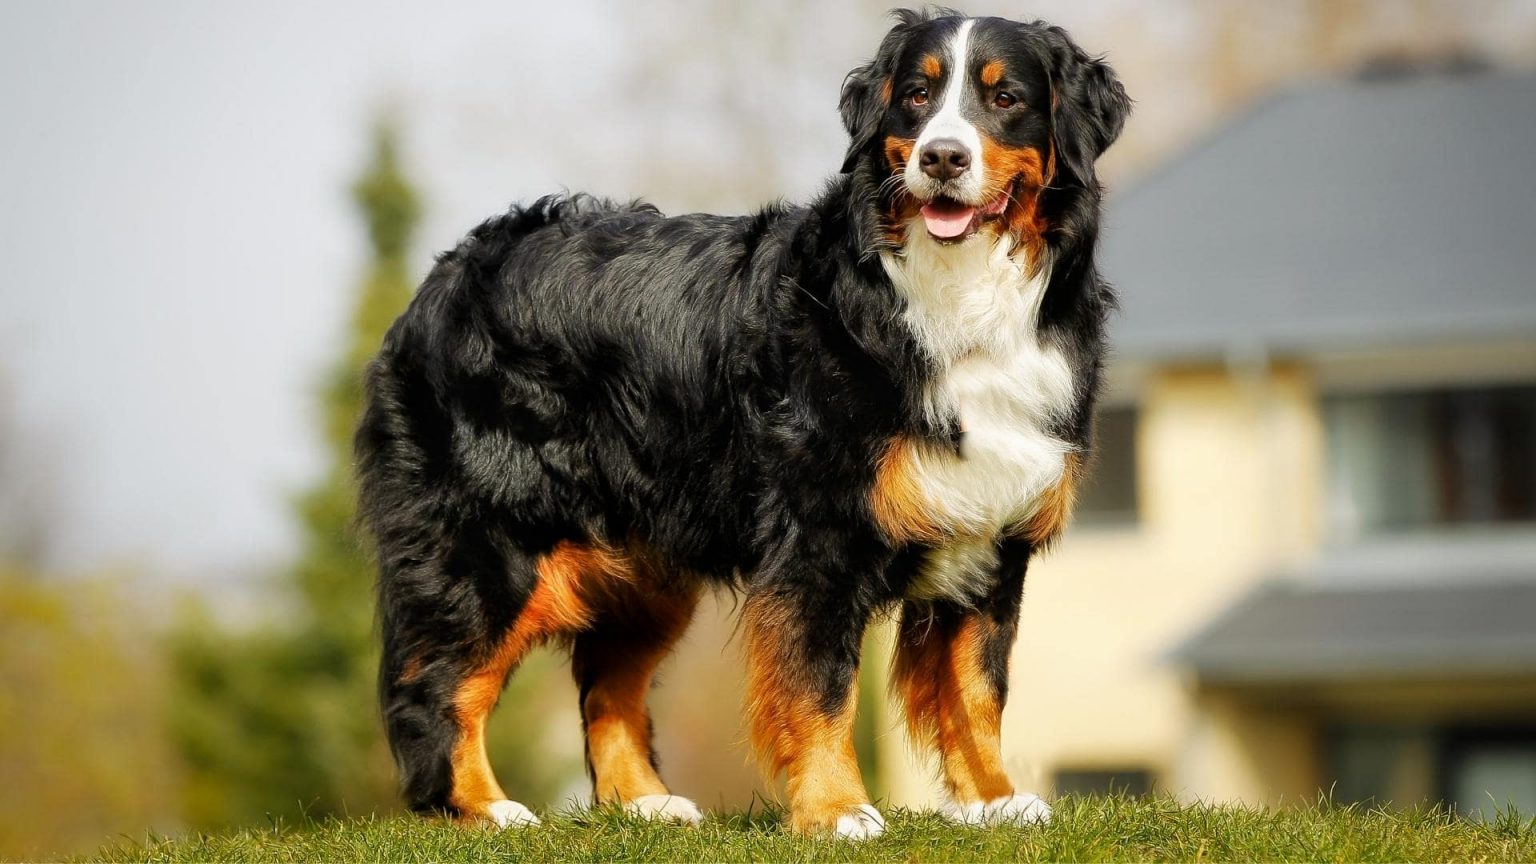 15 Big Fluffy Long Haired Black Dog Breeds (W/ Pictures)